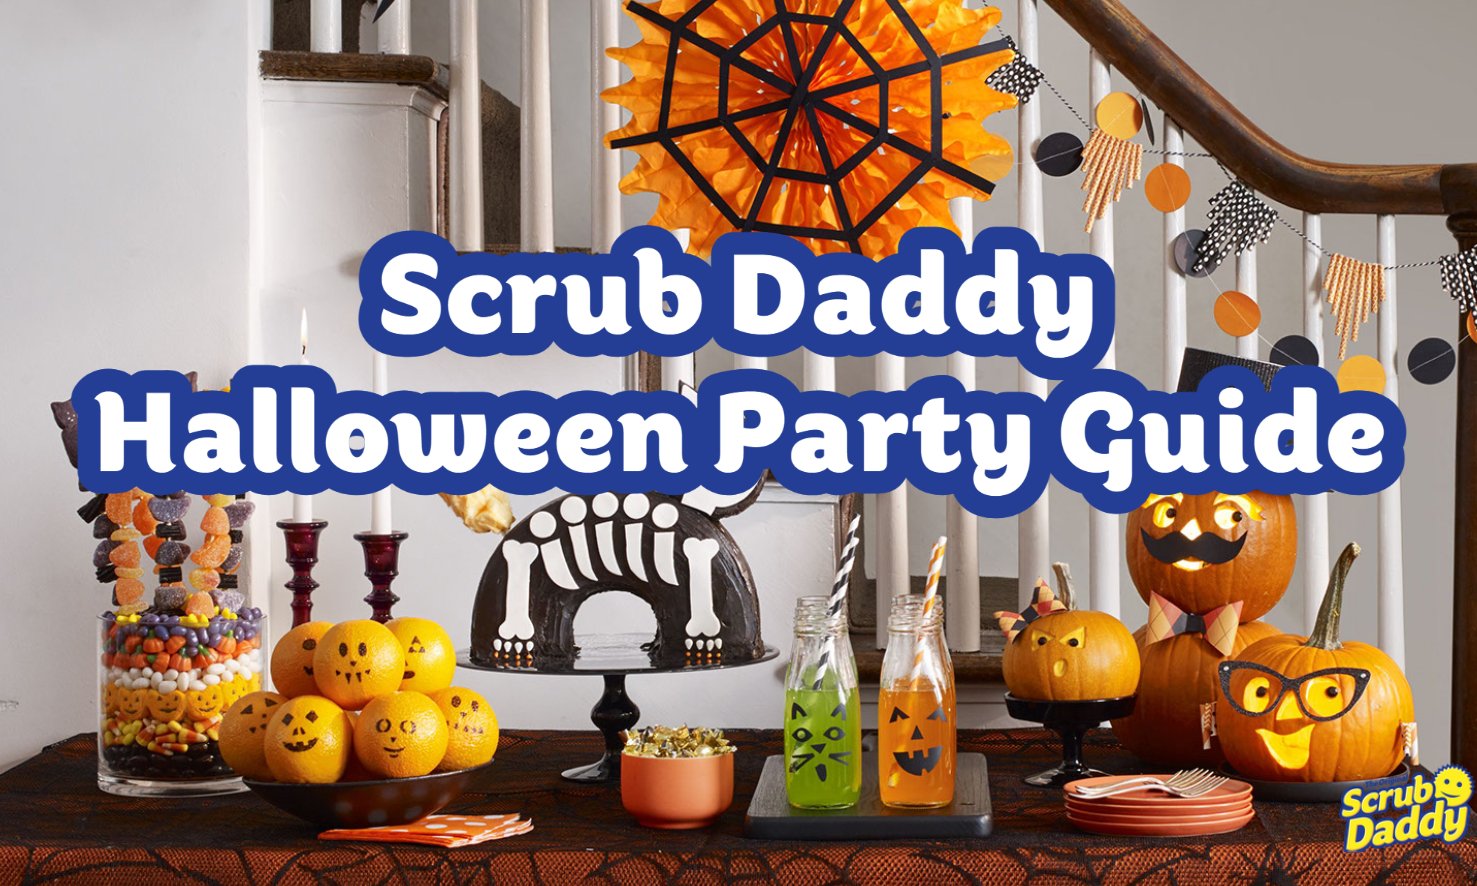 How To Plan A Last Minute Halloween Party - Scrub Daddy PL